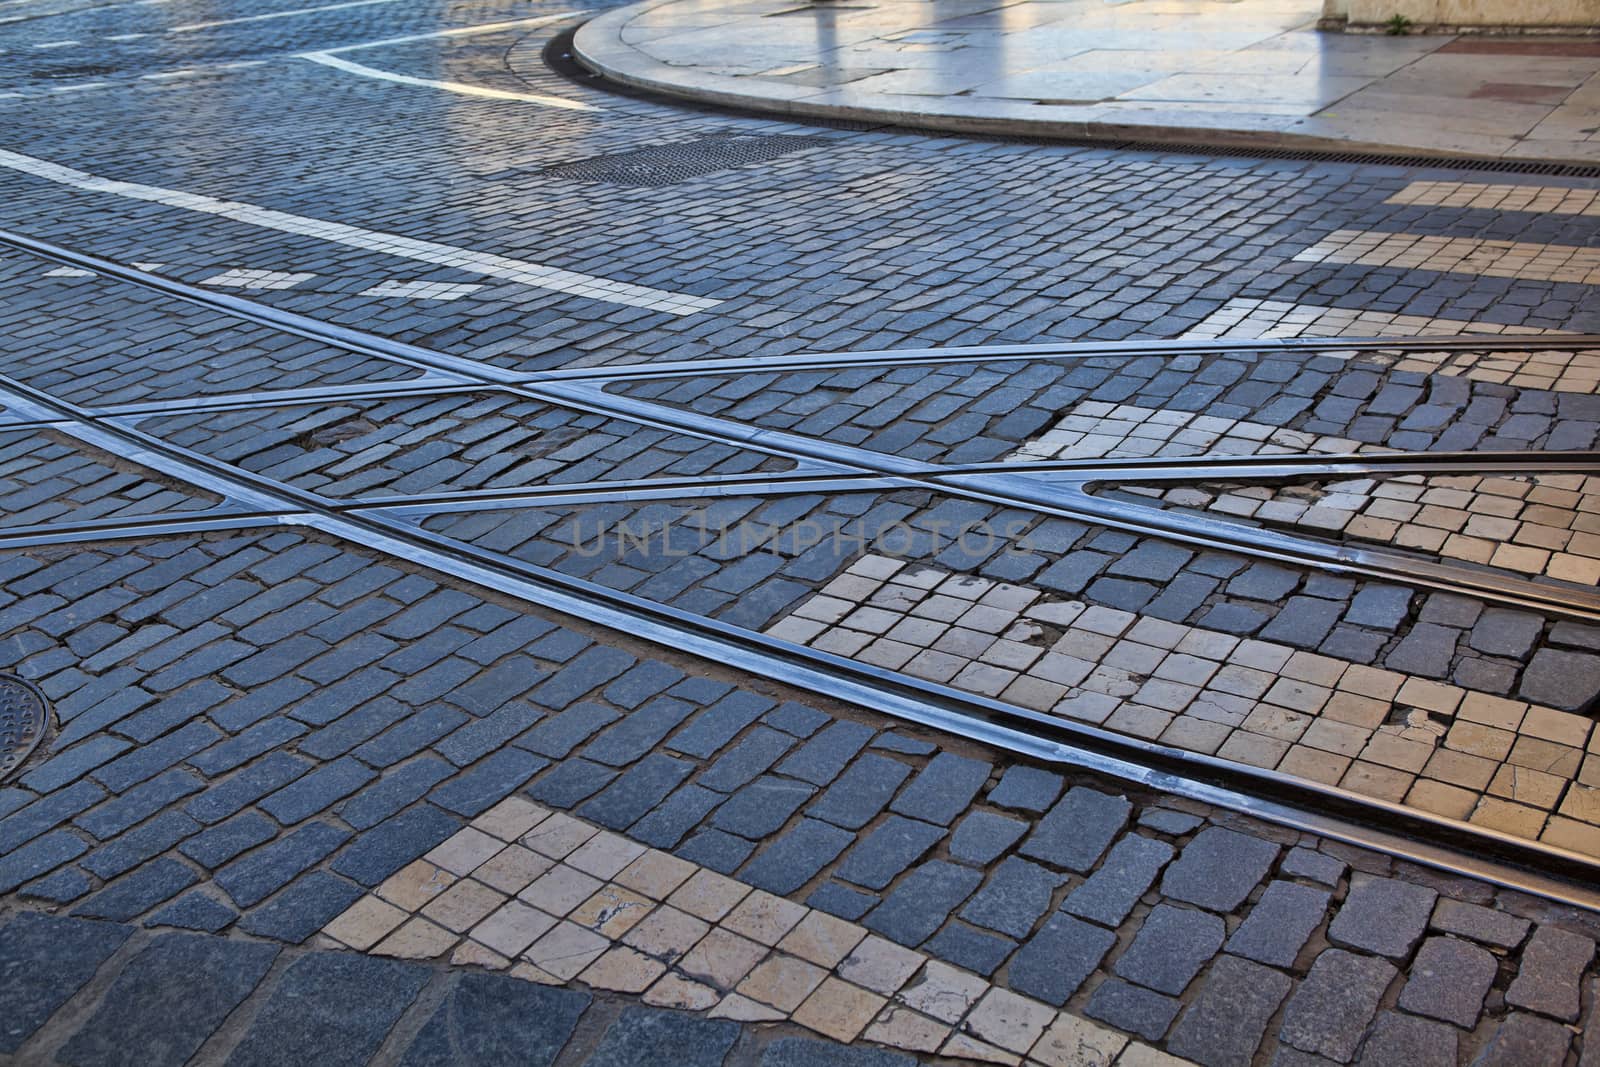 Old rail lines on cobbled road surface